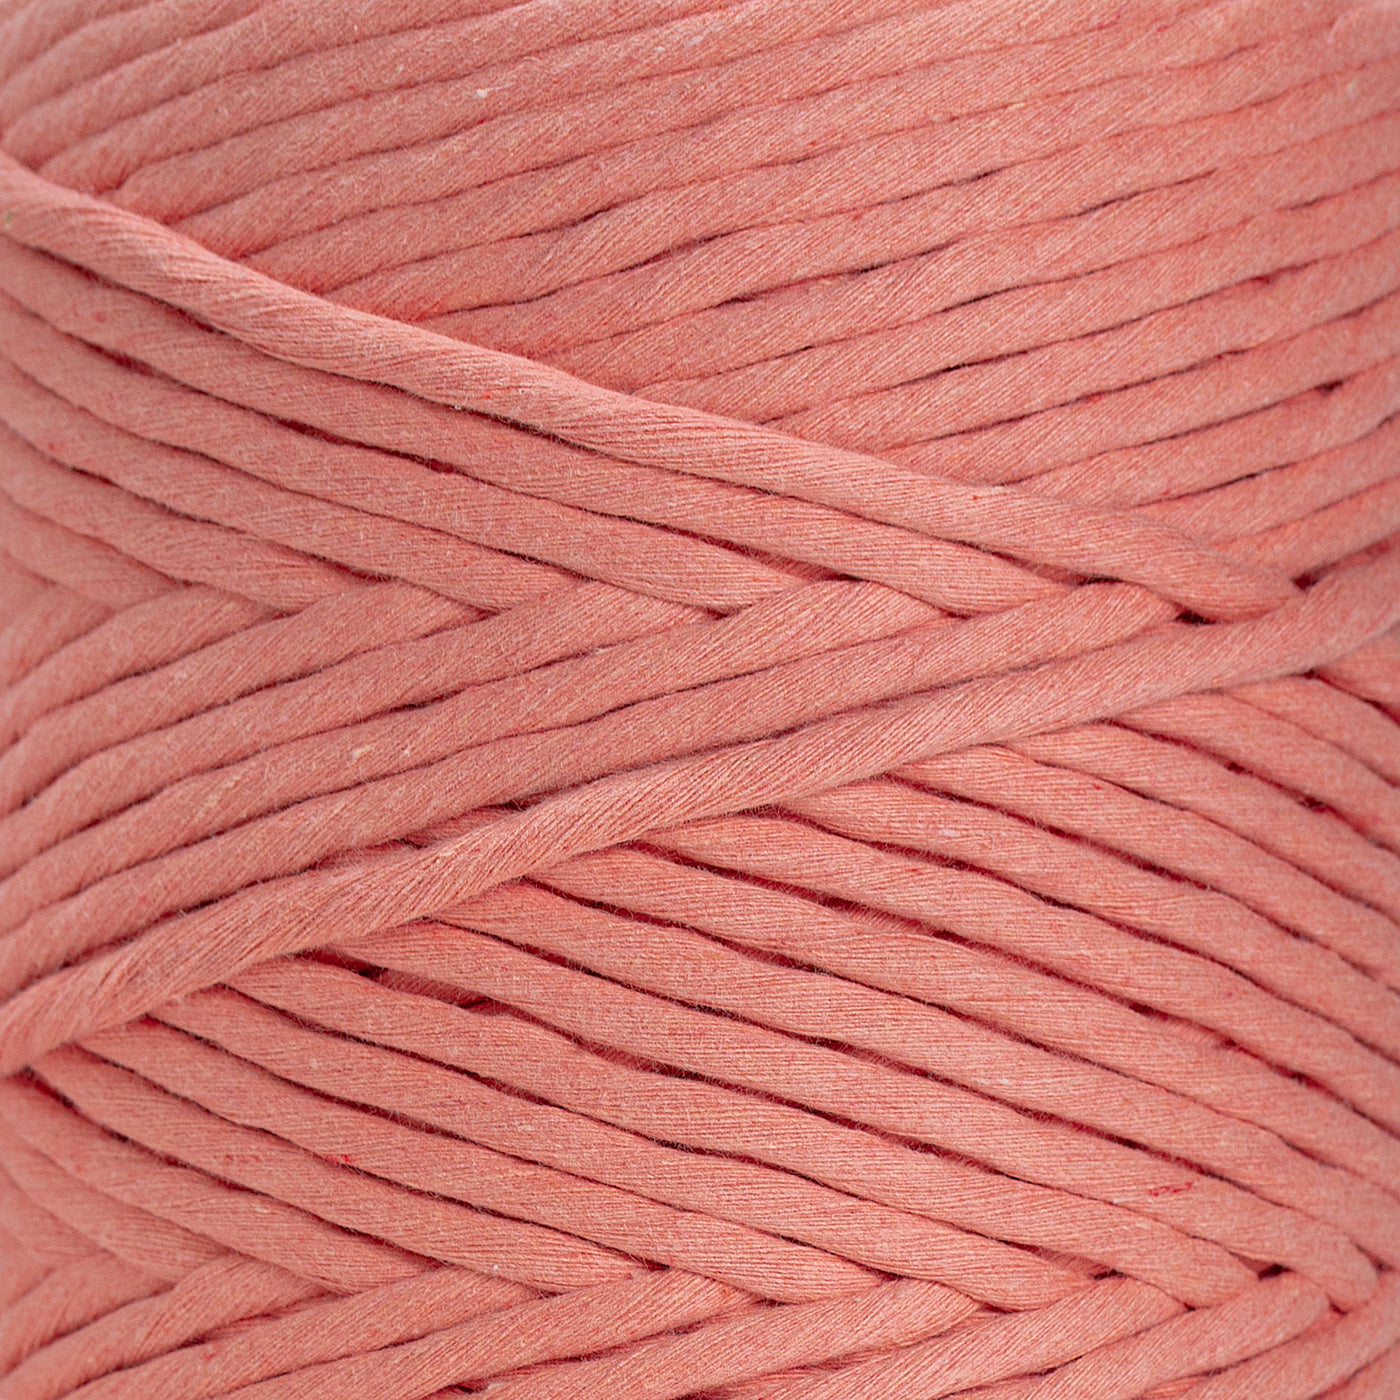 SOFT COTTON CORD ZERO WASTE 6 MM - 1 SINGLE STRAND -  FRUIT PUNCH COLOR